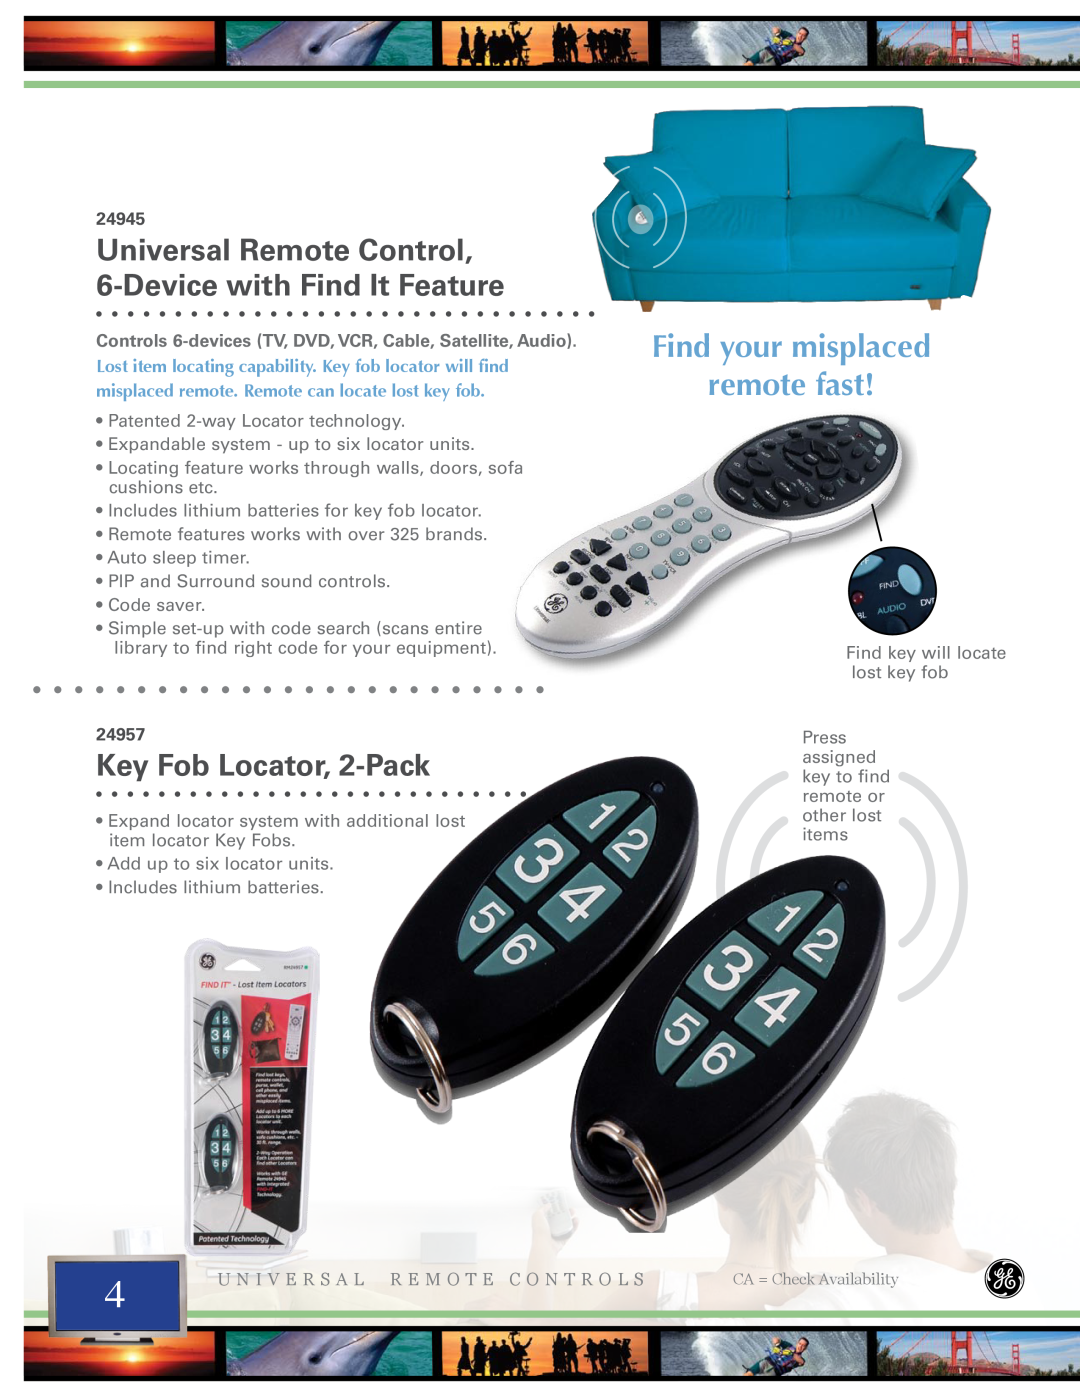 Jasco 24973, 25001, 24970 Universal Remote Control 6-Device with Find It Feature, Key Fob Locator, 2-Pack, 24945, 24957 